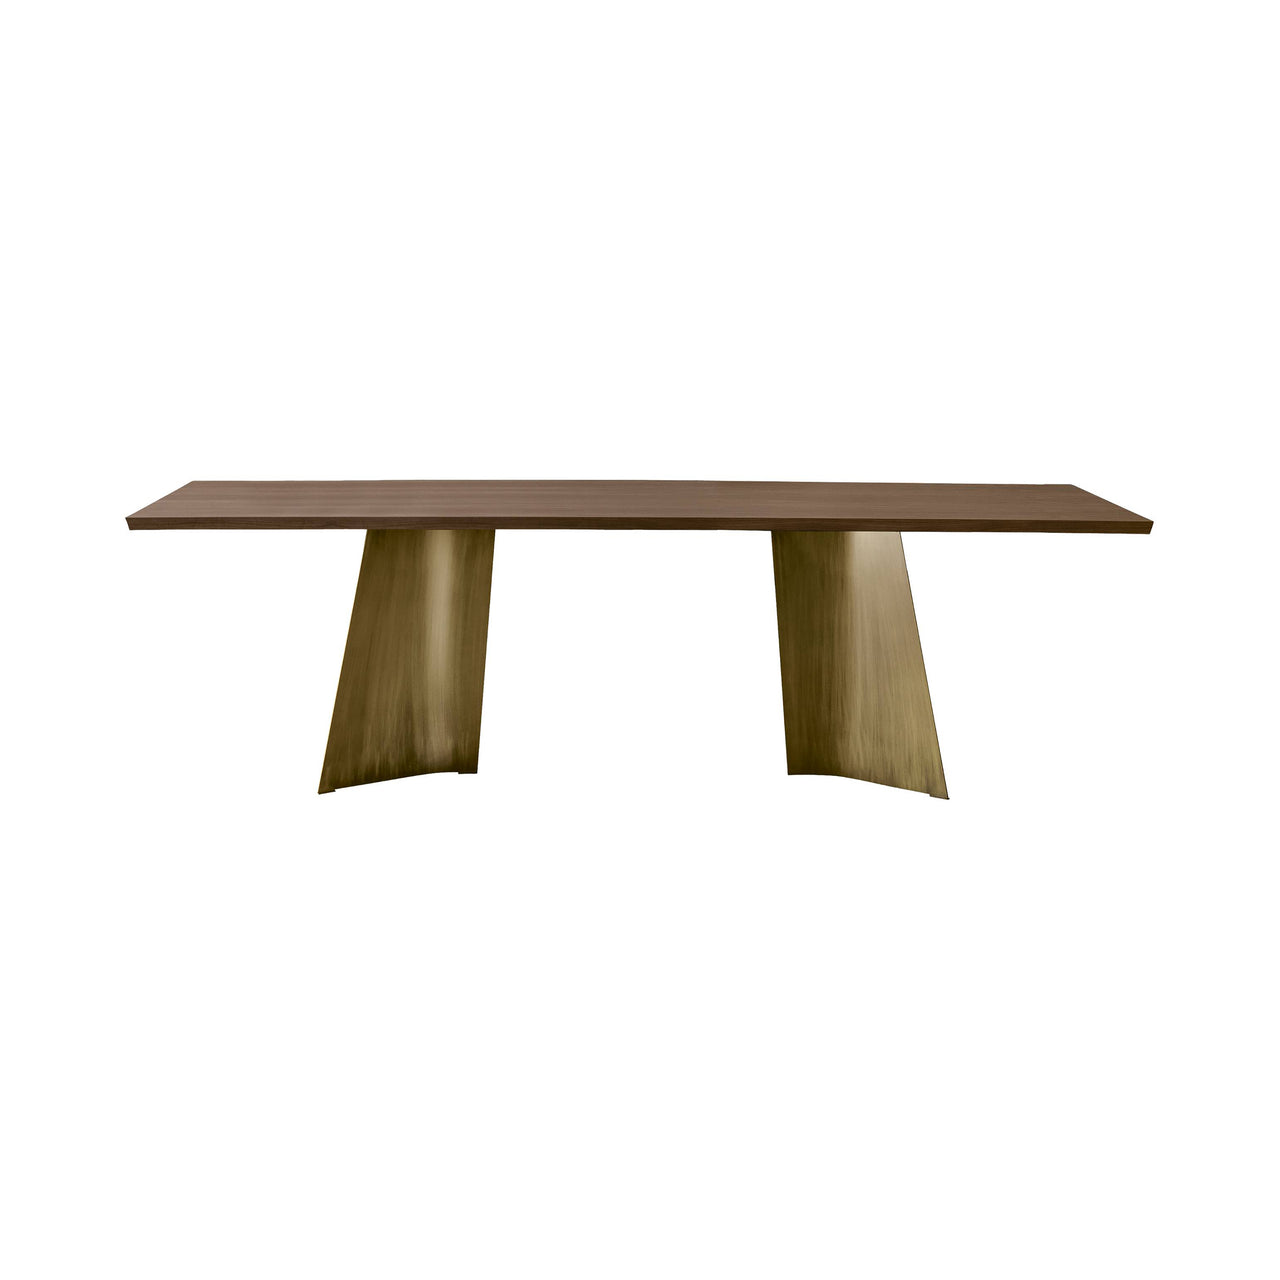 Maggese Dining Table: Small - 78.7